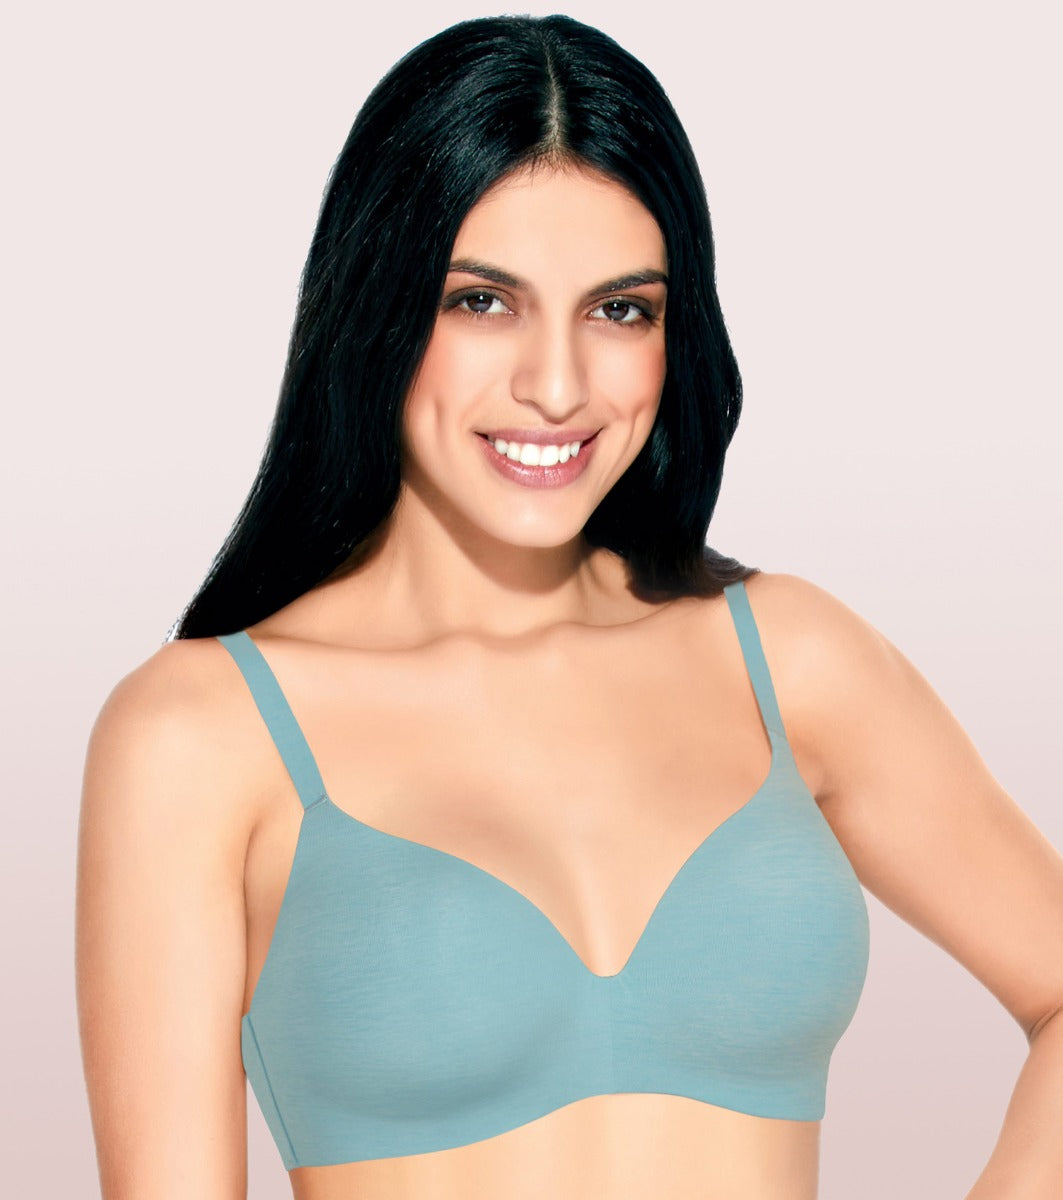 Enamor F155 Back Transparent Strapless Nylon Bra Padded Wired Medium  Coverage (34D, Pale Skin) in Ahmedabad at best price by In Vogue Shalliy  Fashion - Justdial